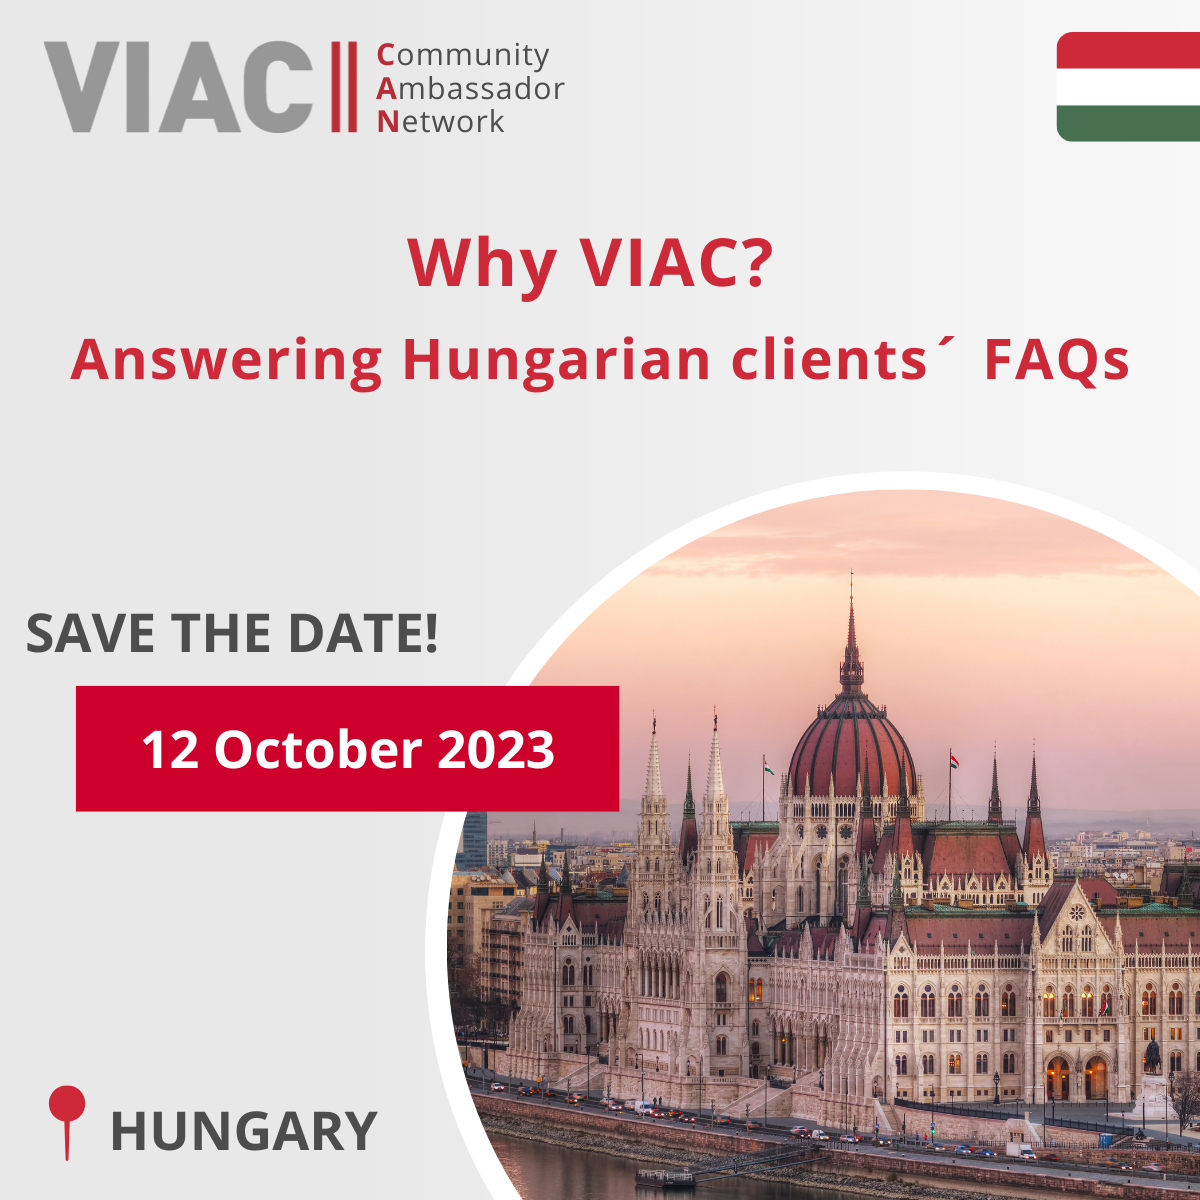 VIAC CAN Event "Why VIAC? - Answering Hungarian client's FAQs" on 12 October 2023 - Save the Date